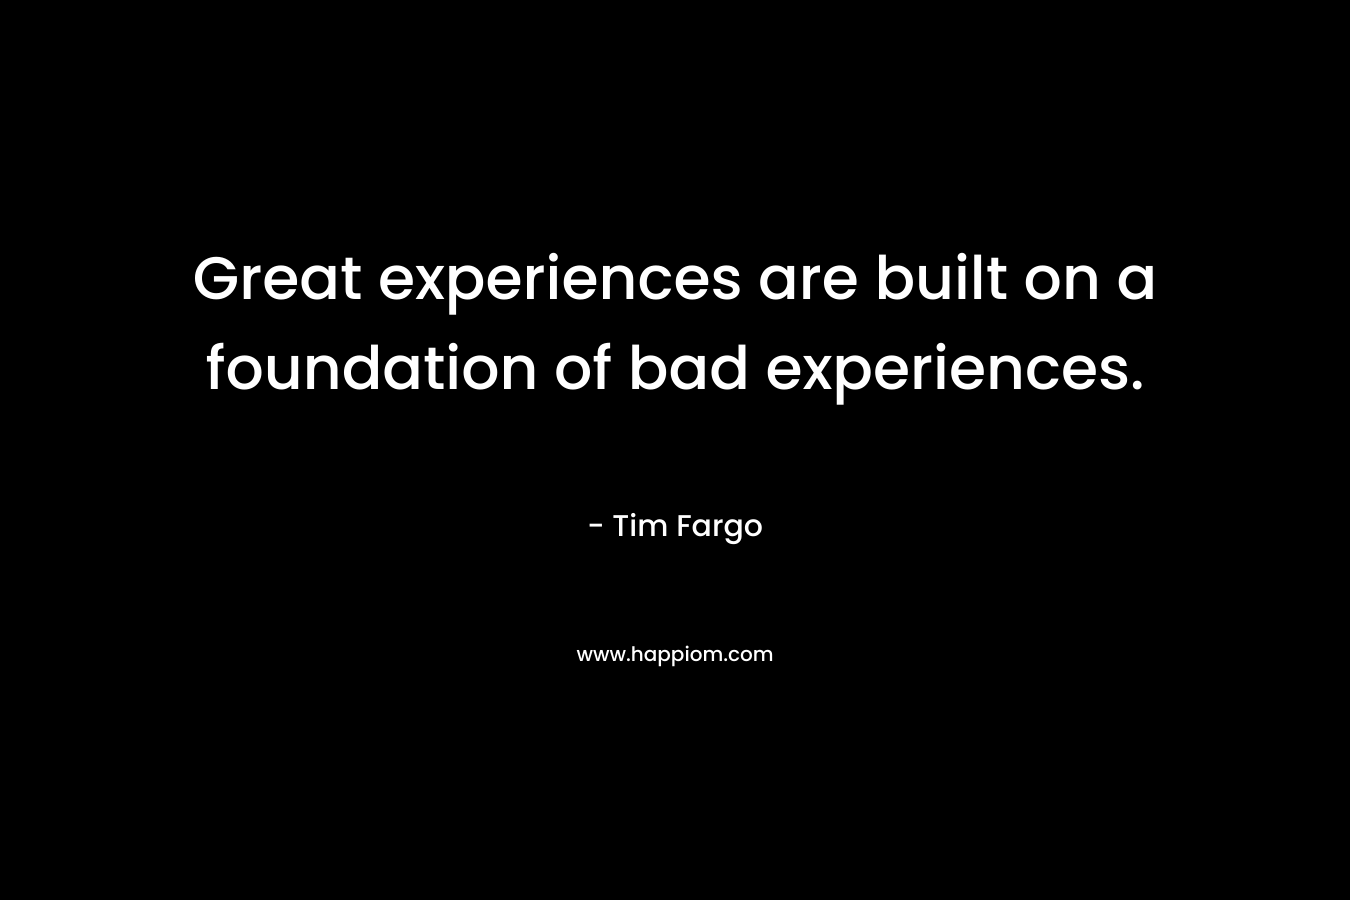 Great experiences are built on a foundation of bad experiences.